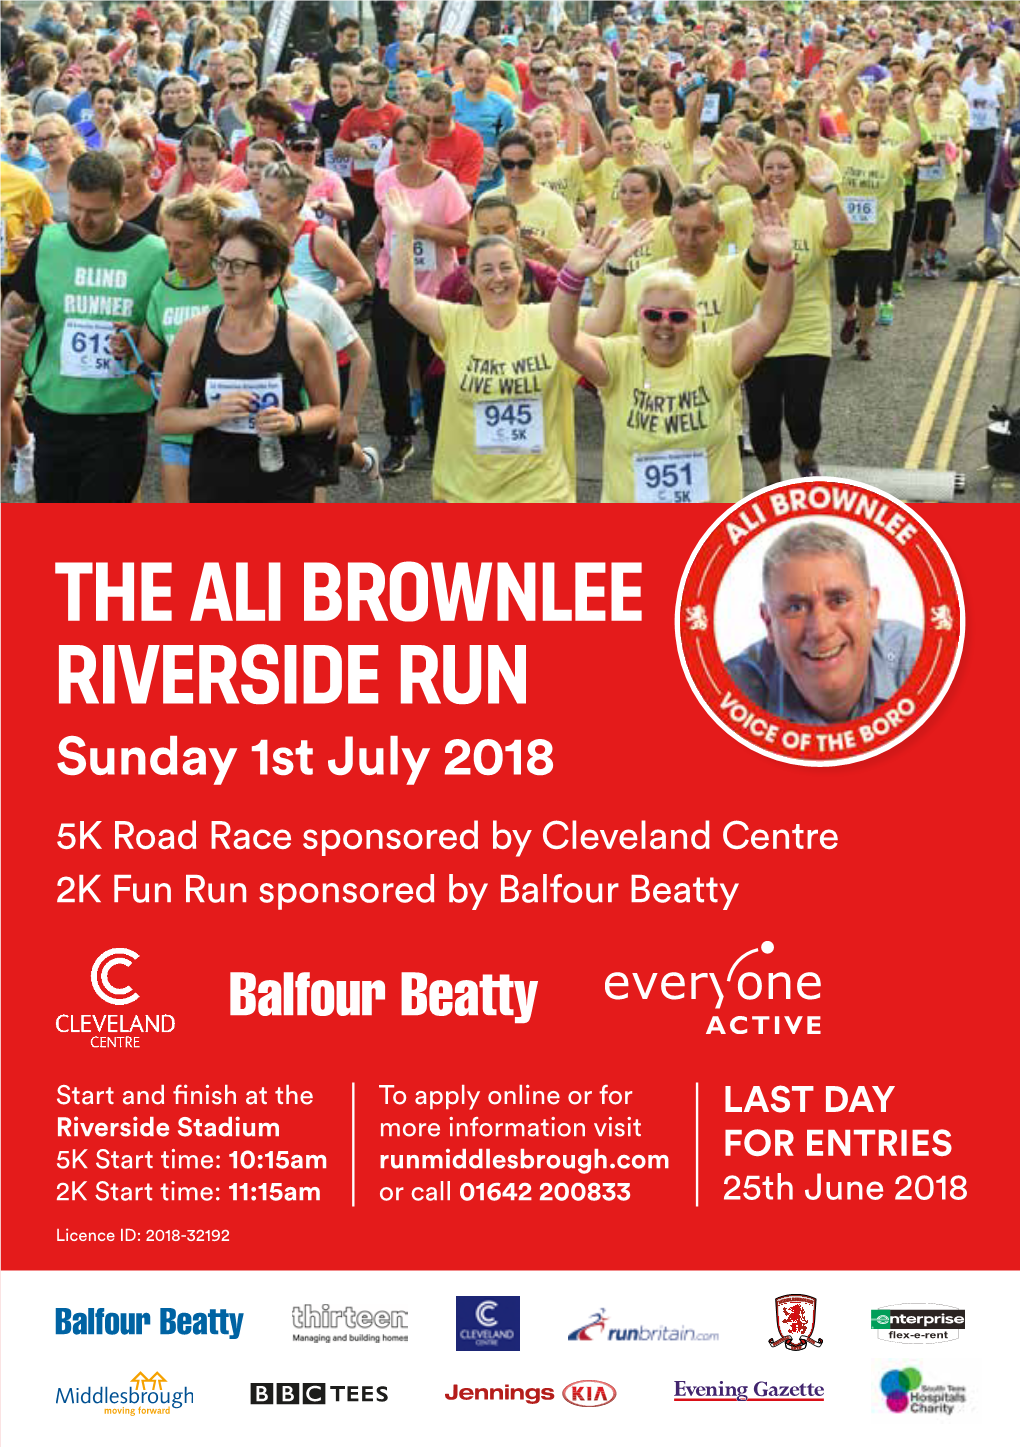 THE ALI BROWNLEE RIVERSIDE RUN Sunday 1St July 2018 5K Road Race Sponsored by Cleveland Centre 2K Fun Run Sponsored by Balfour Beatty